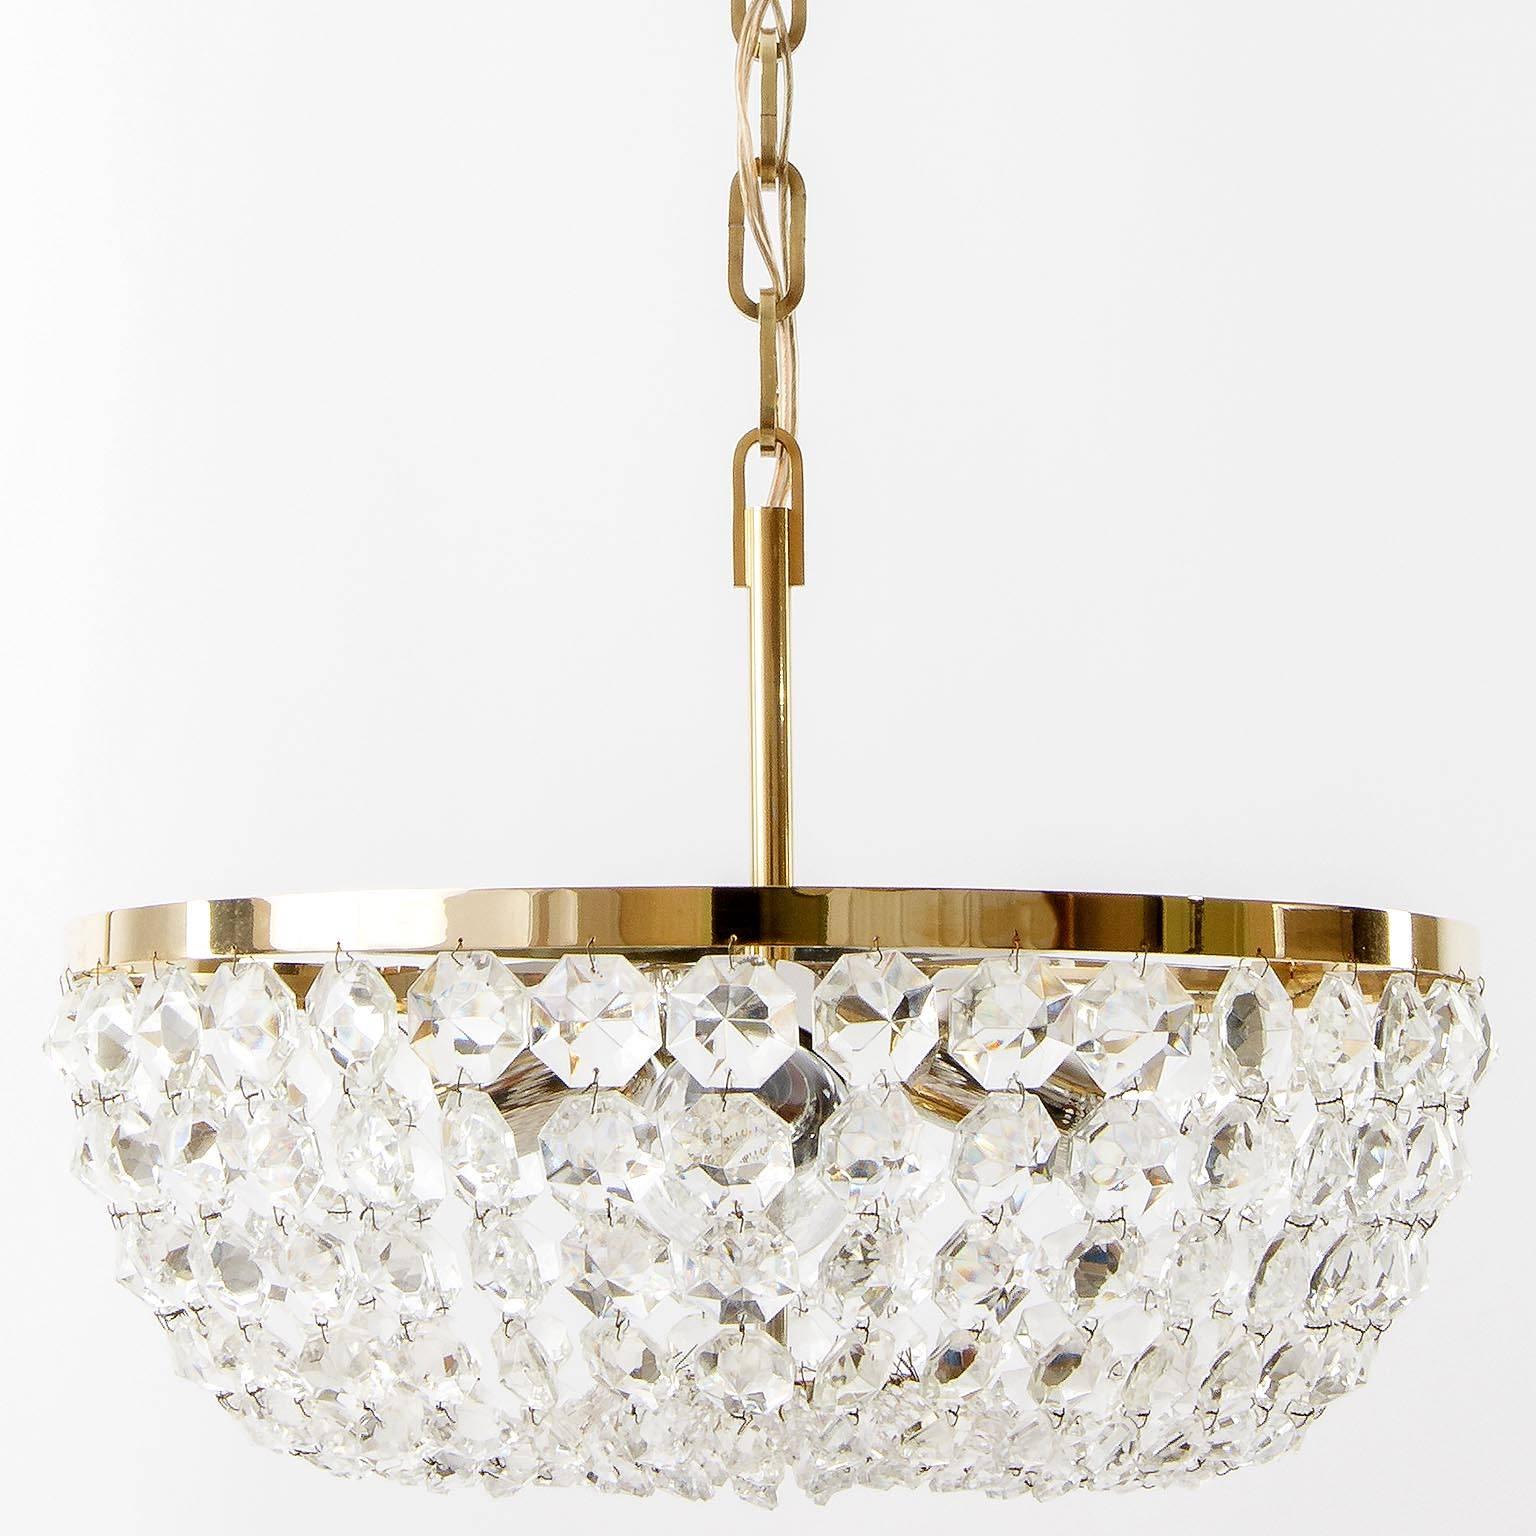 A basket chandelier by Bakalowits & Söhne, Vienna, manufactured in Mid-Century, circa 1960 (late 1950s or early 1960s).
A handmade and high quality piece. A brass and nickeled frame is decorated with diamond shaped crystal glass. The fixture takes